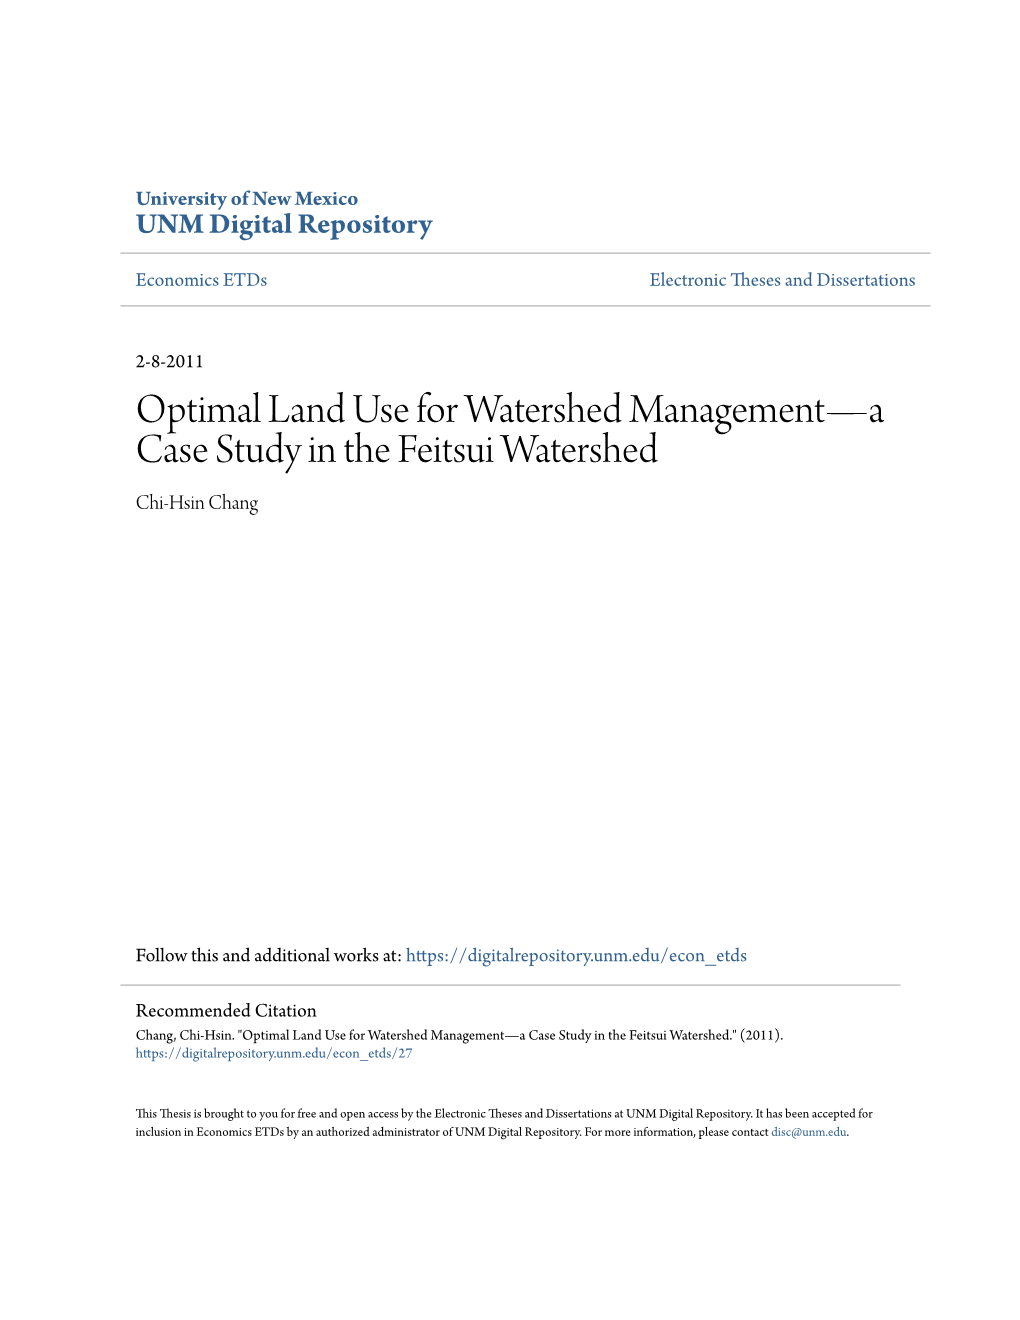 Optimal Land Use for Watershed Management—A Case Study in the Feitsui Watershed Chi-Hsin Chang